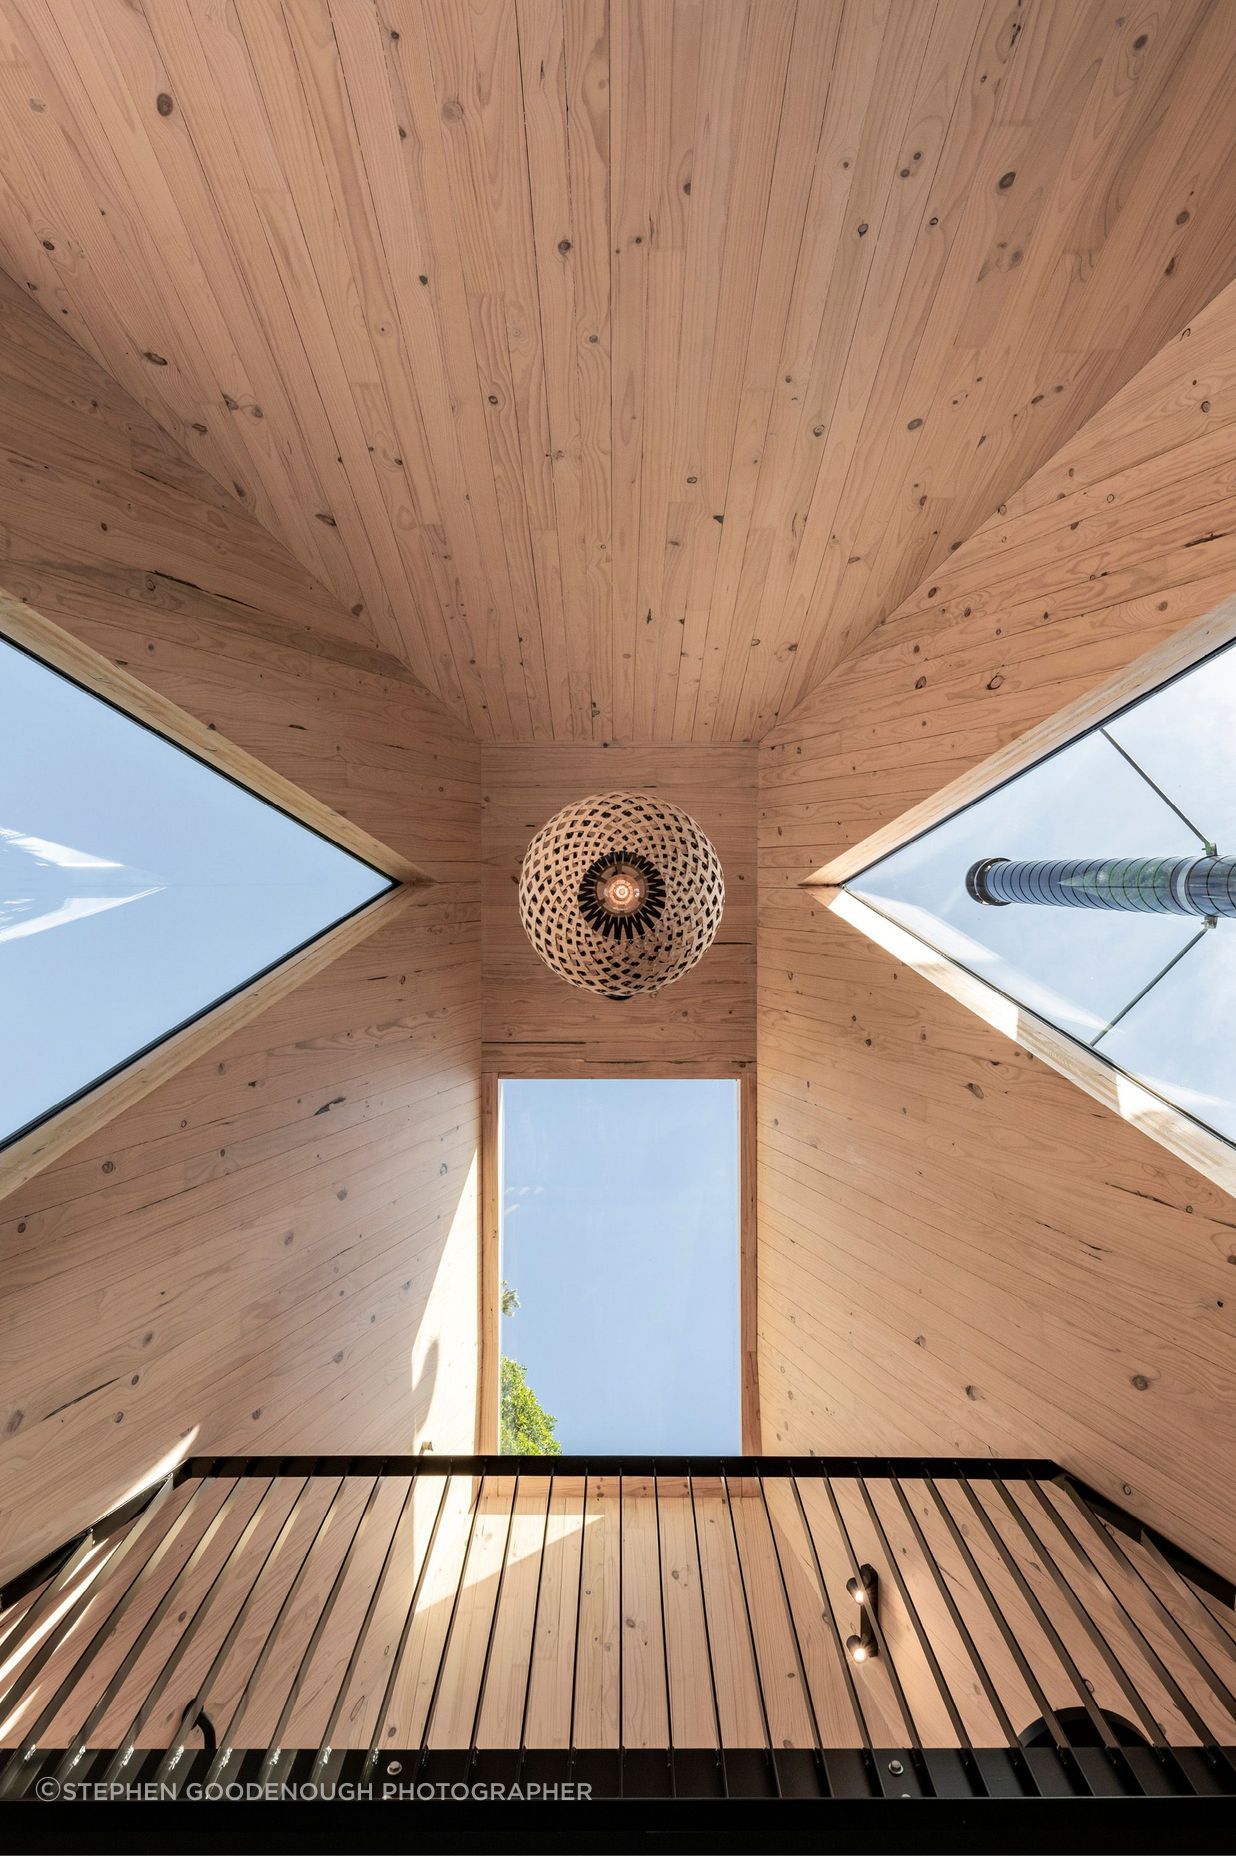 The skylights create a beautiful connection with the weather, anchoring visitors with a sense of place.